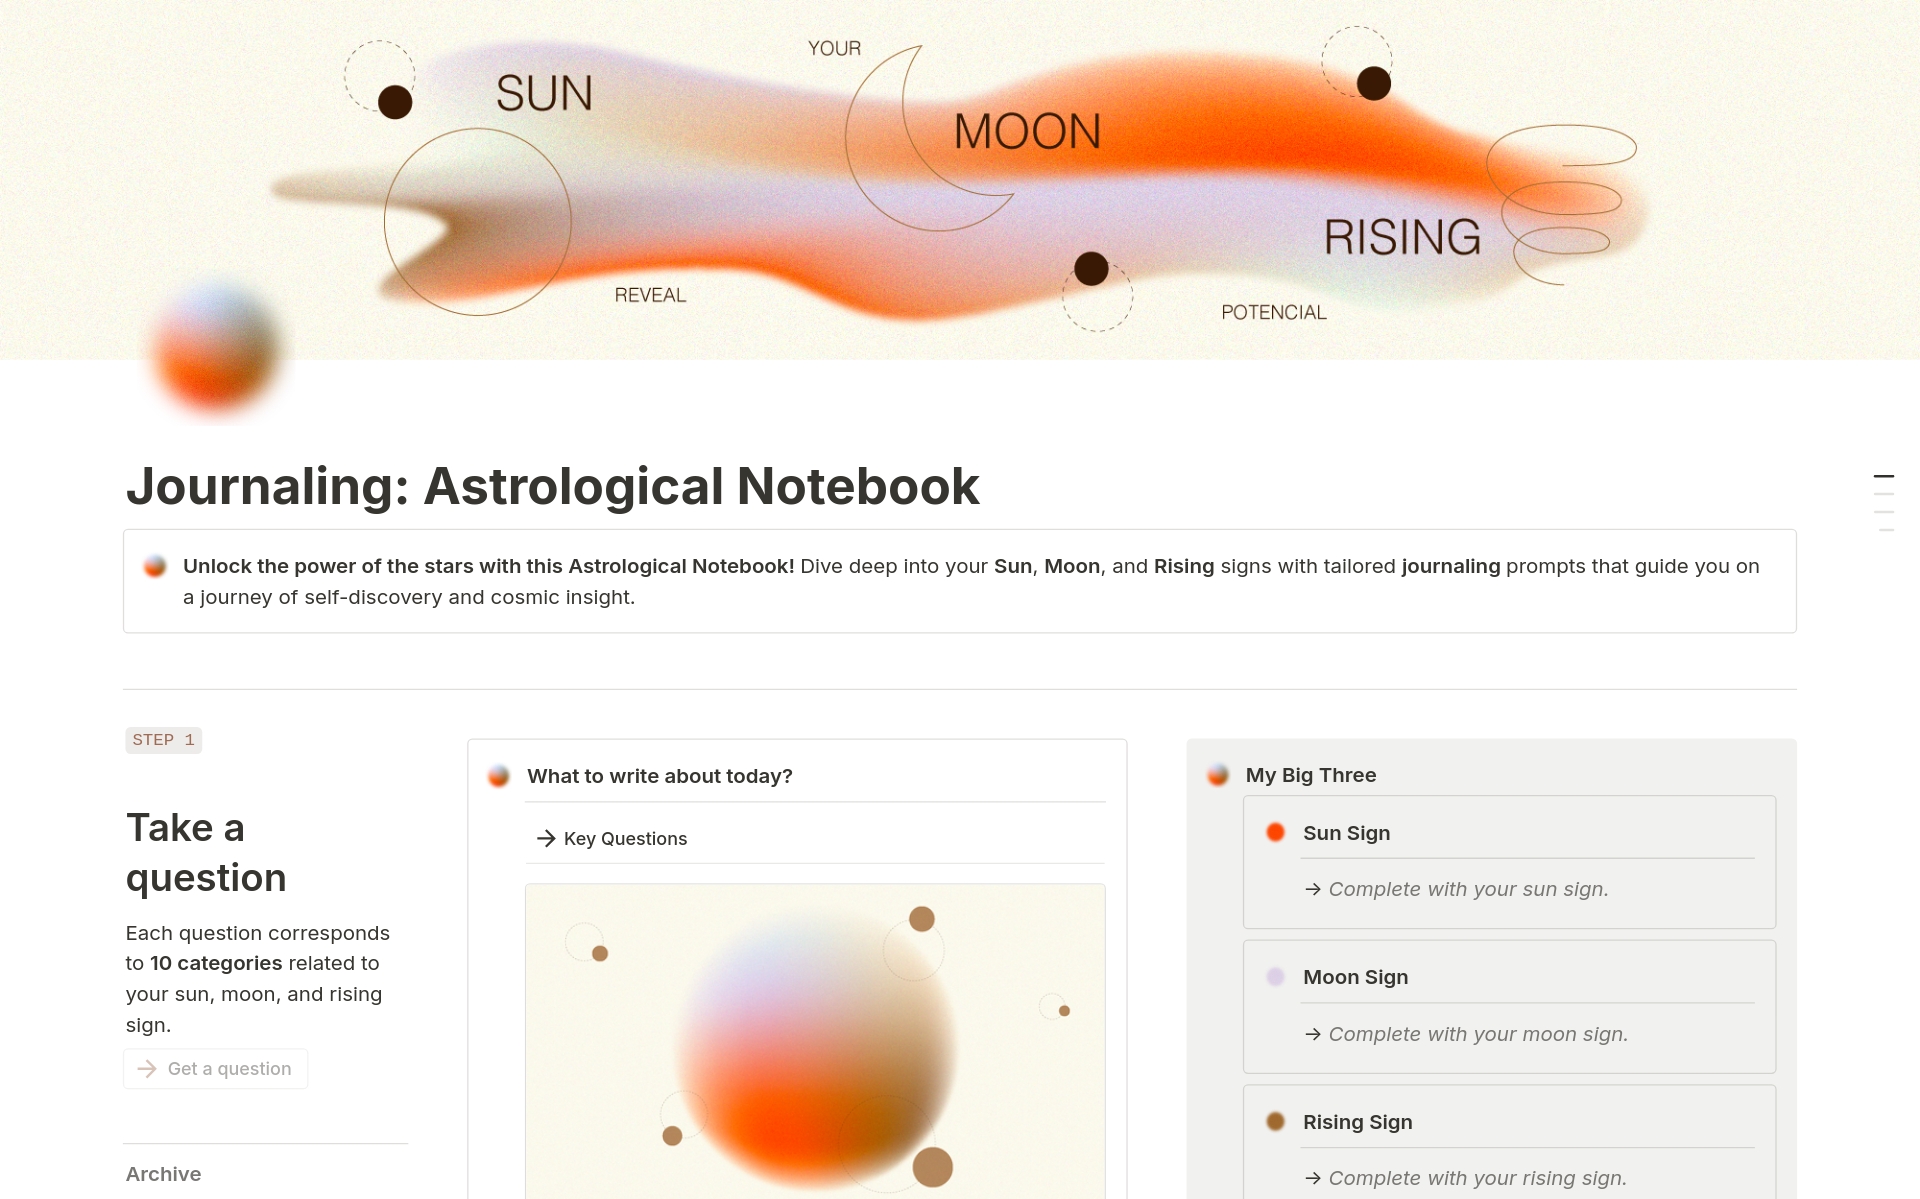 Unlock the power of the stars with this Astrological Notebook! Dive deep into your Sun, Moon, and Rising signs with tailored journaling prompts that guide you on a journey of self-discovery and cosmic insight.